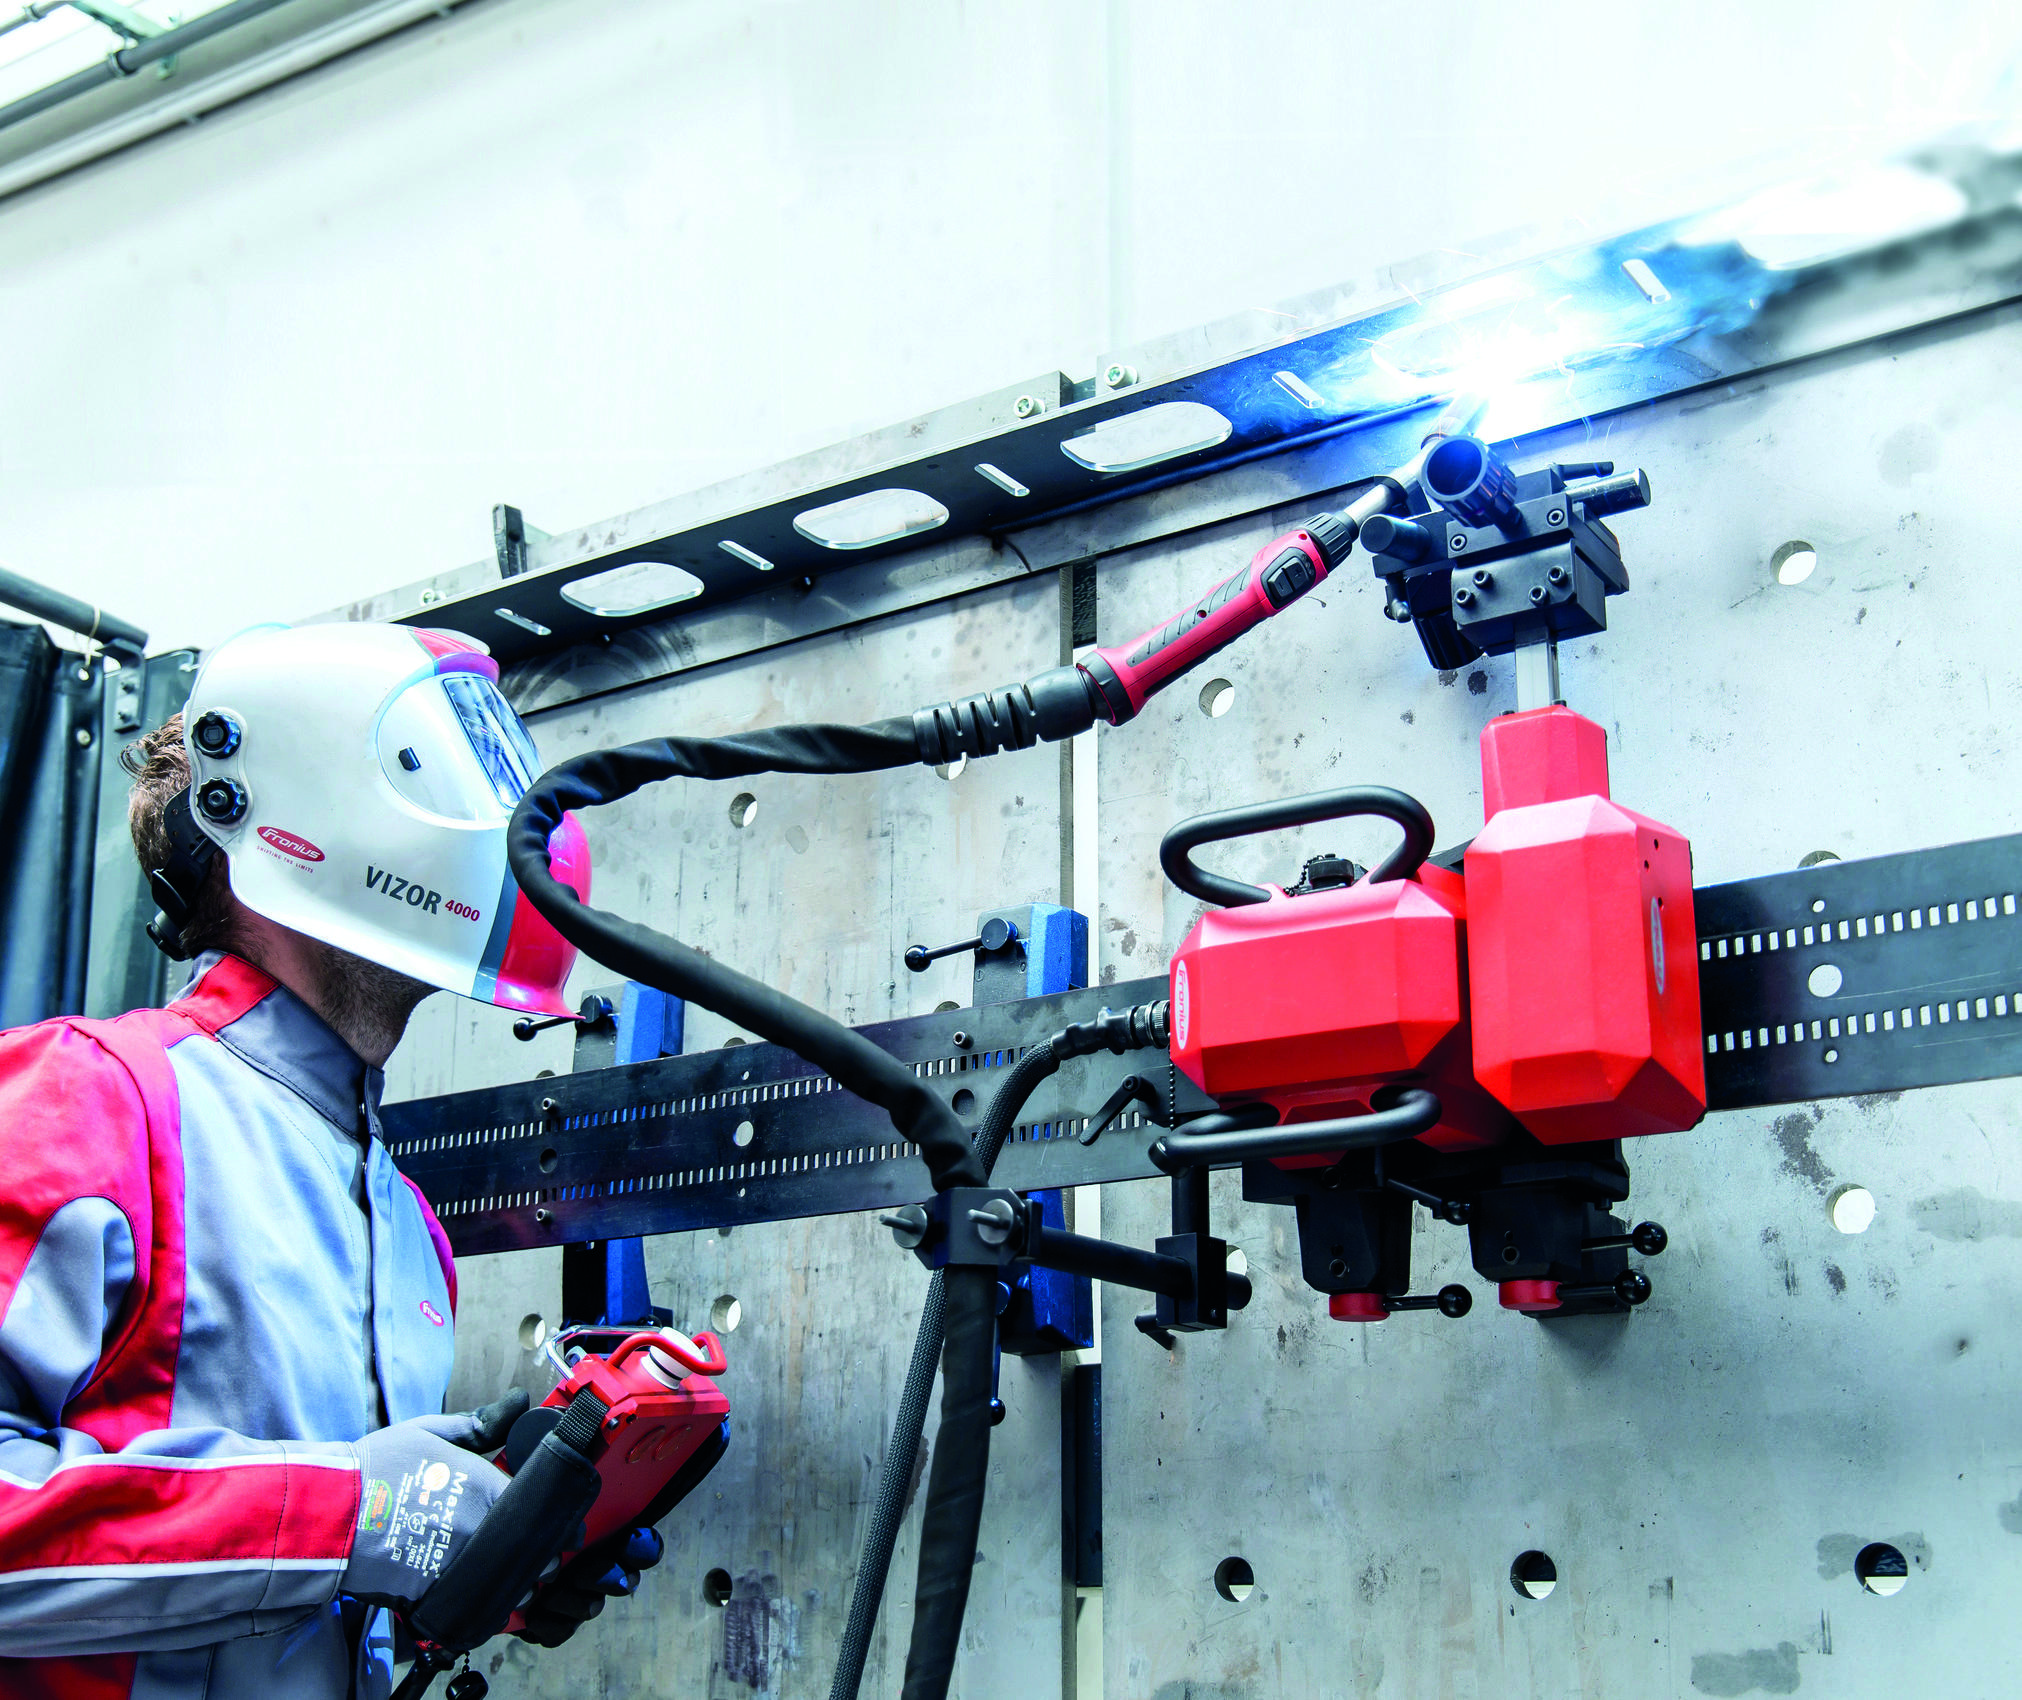 Ergonomic welding—a contradiction in terms?